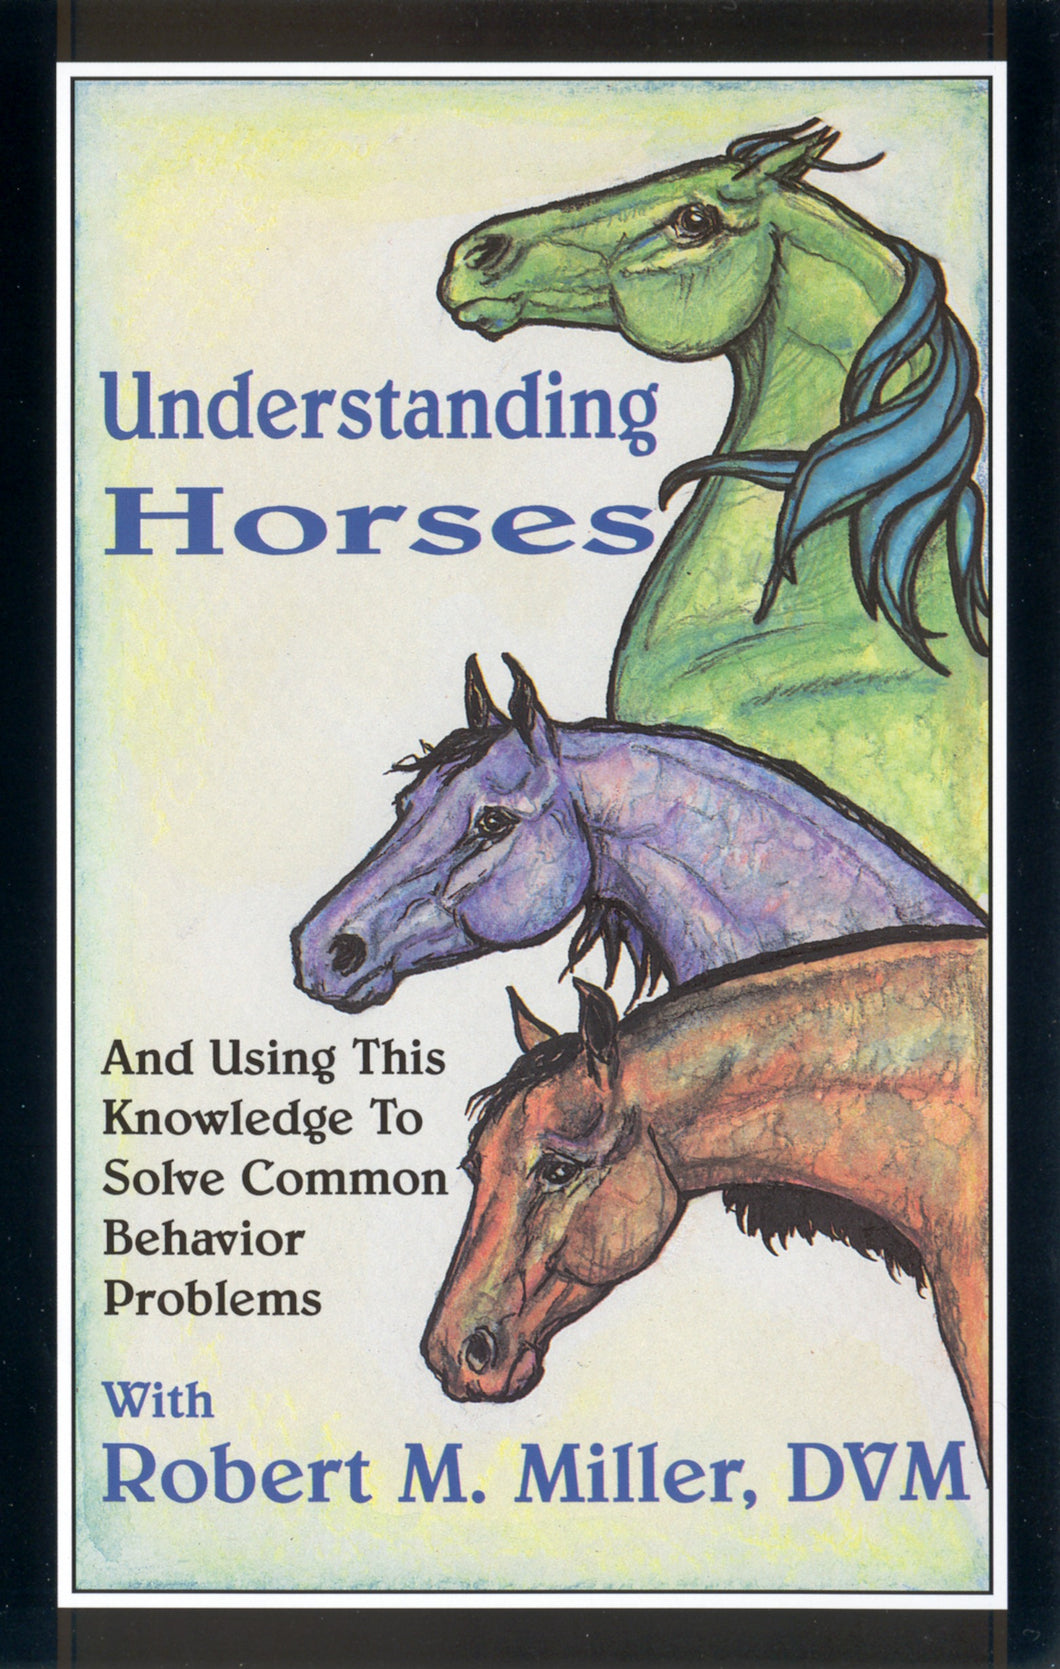 UNDERSTANDING HORSES - And Using That Knowledge To Solve Common Behavior Problems